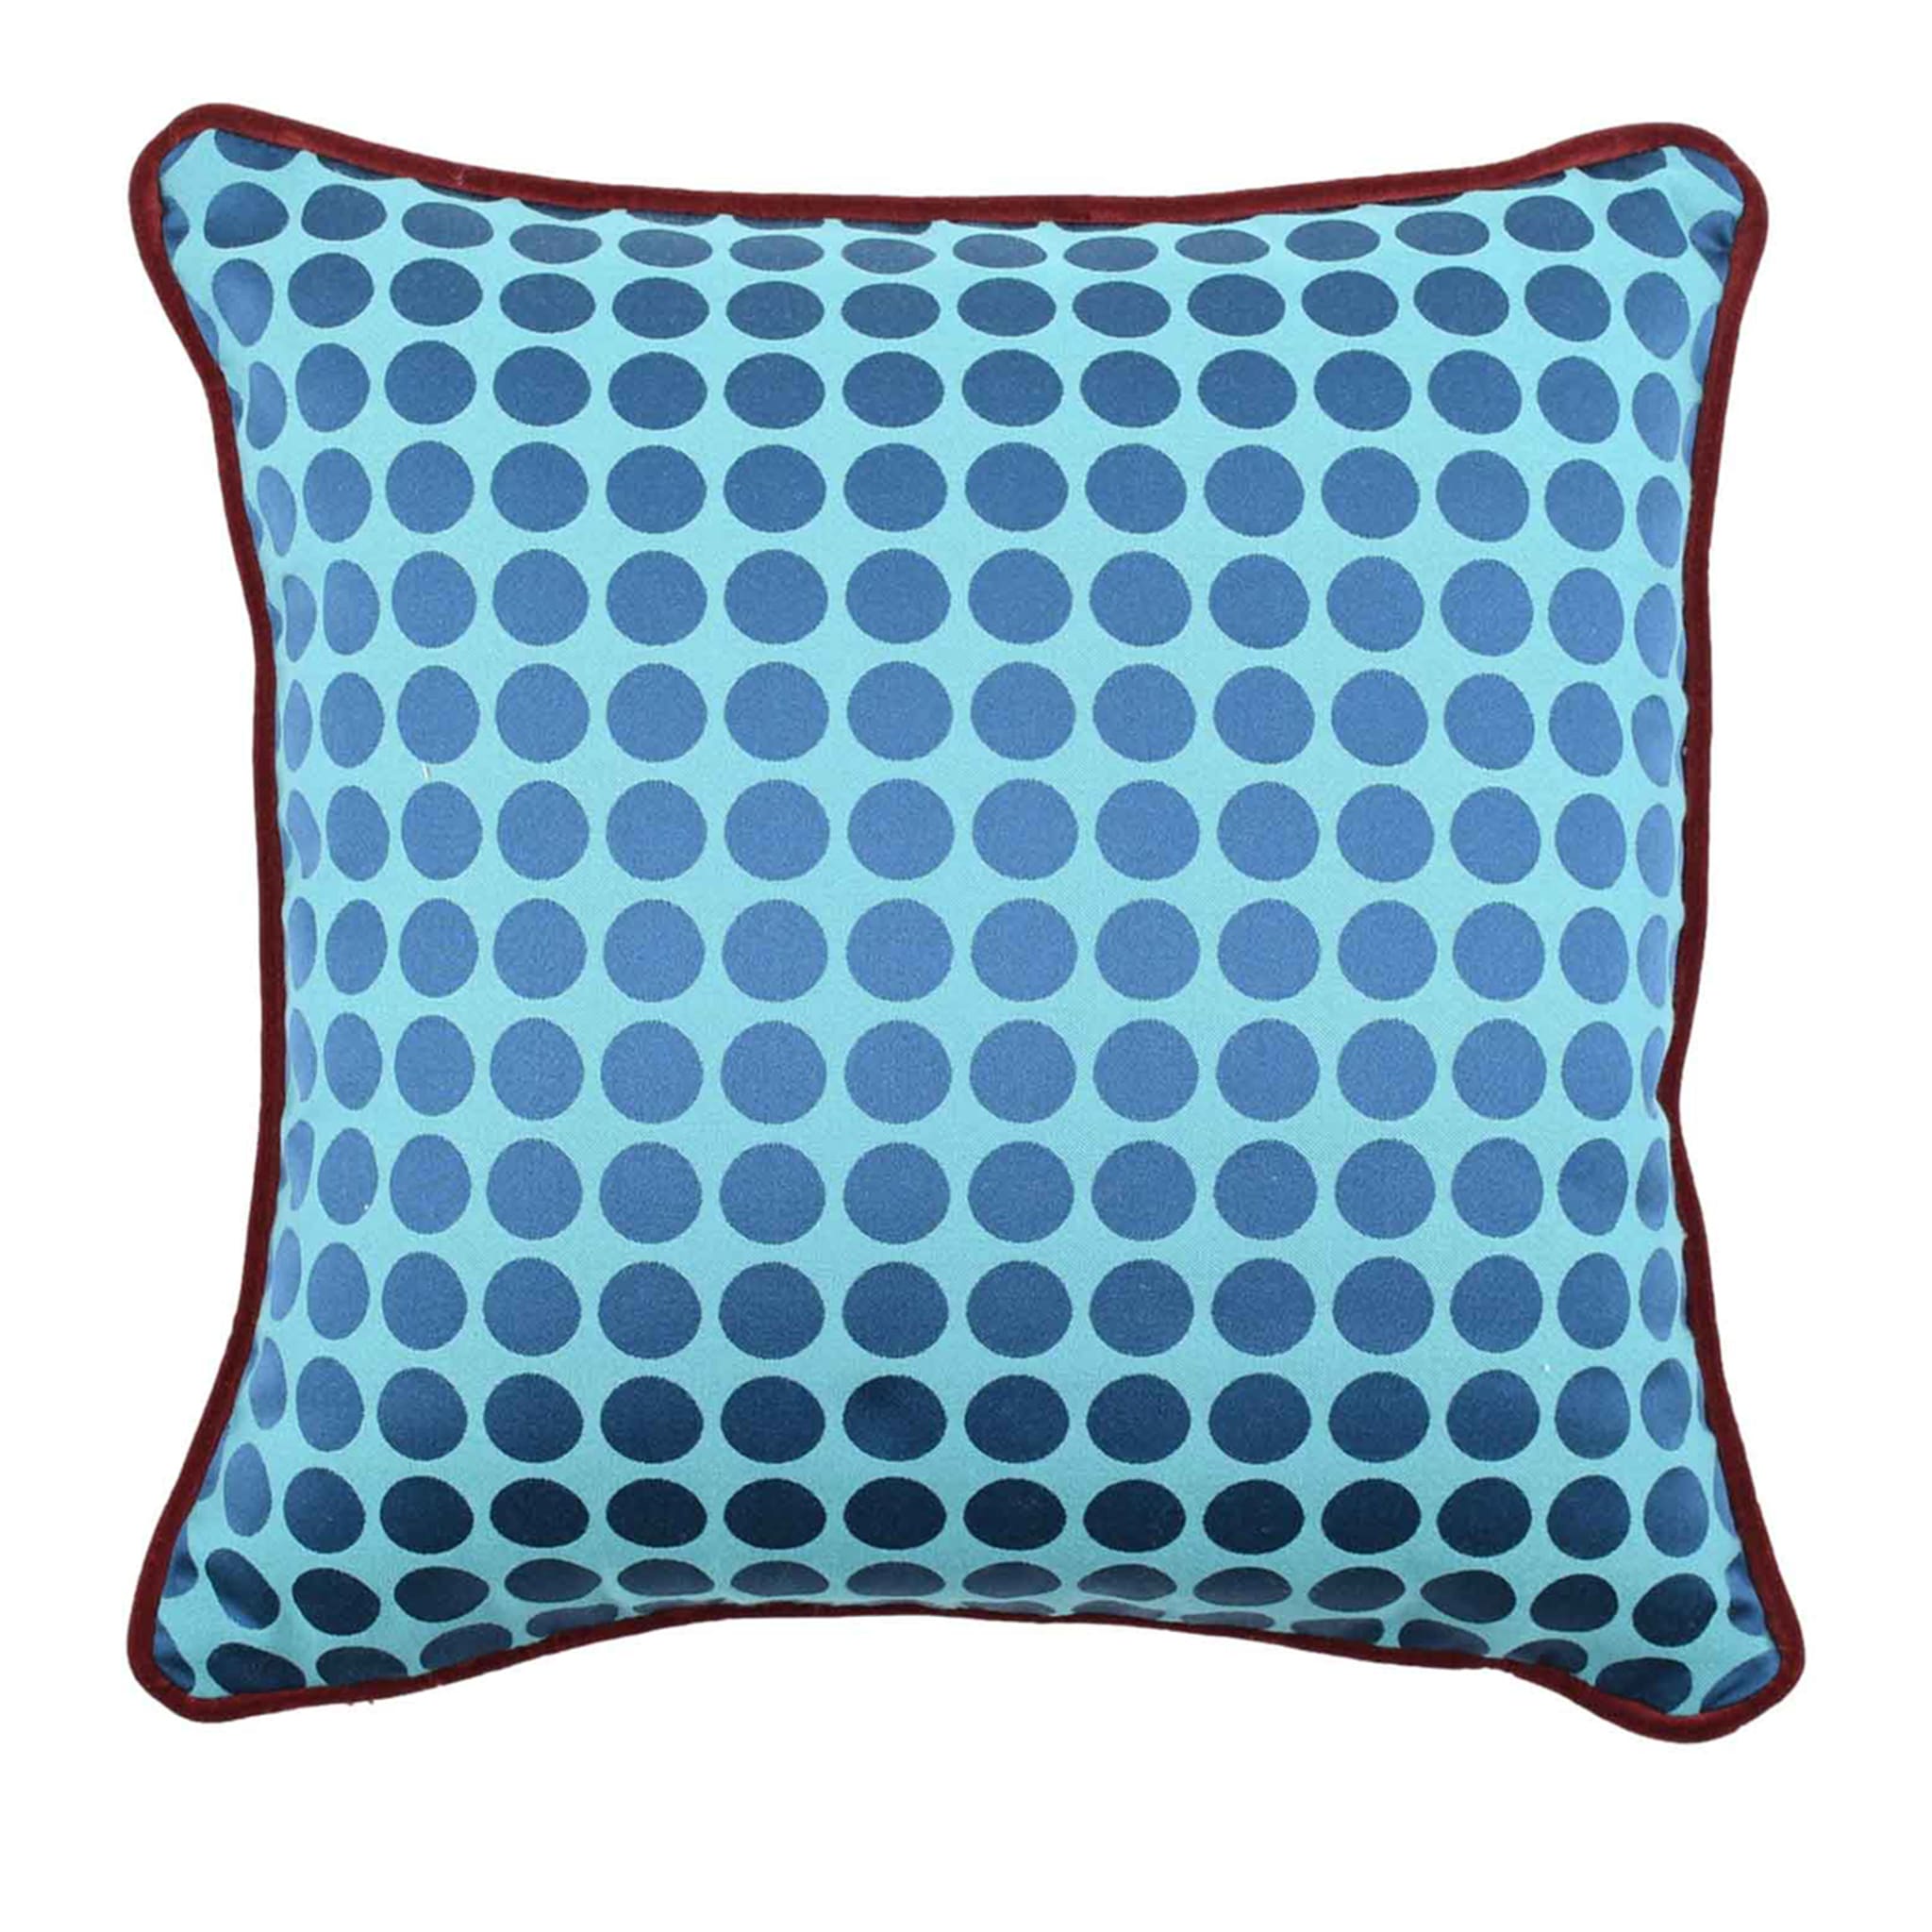 Turquoise and Blue Carrè Cushion in polka dots jacquard fabric - Main view